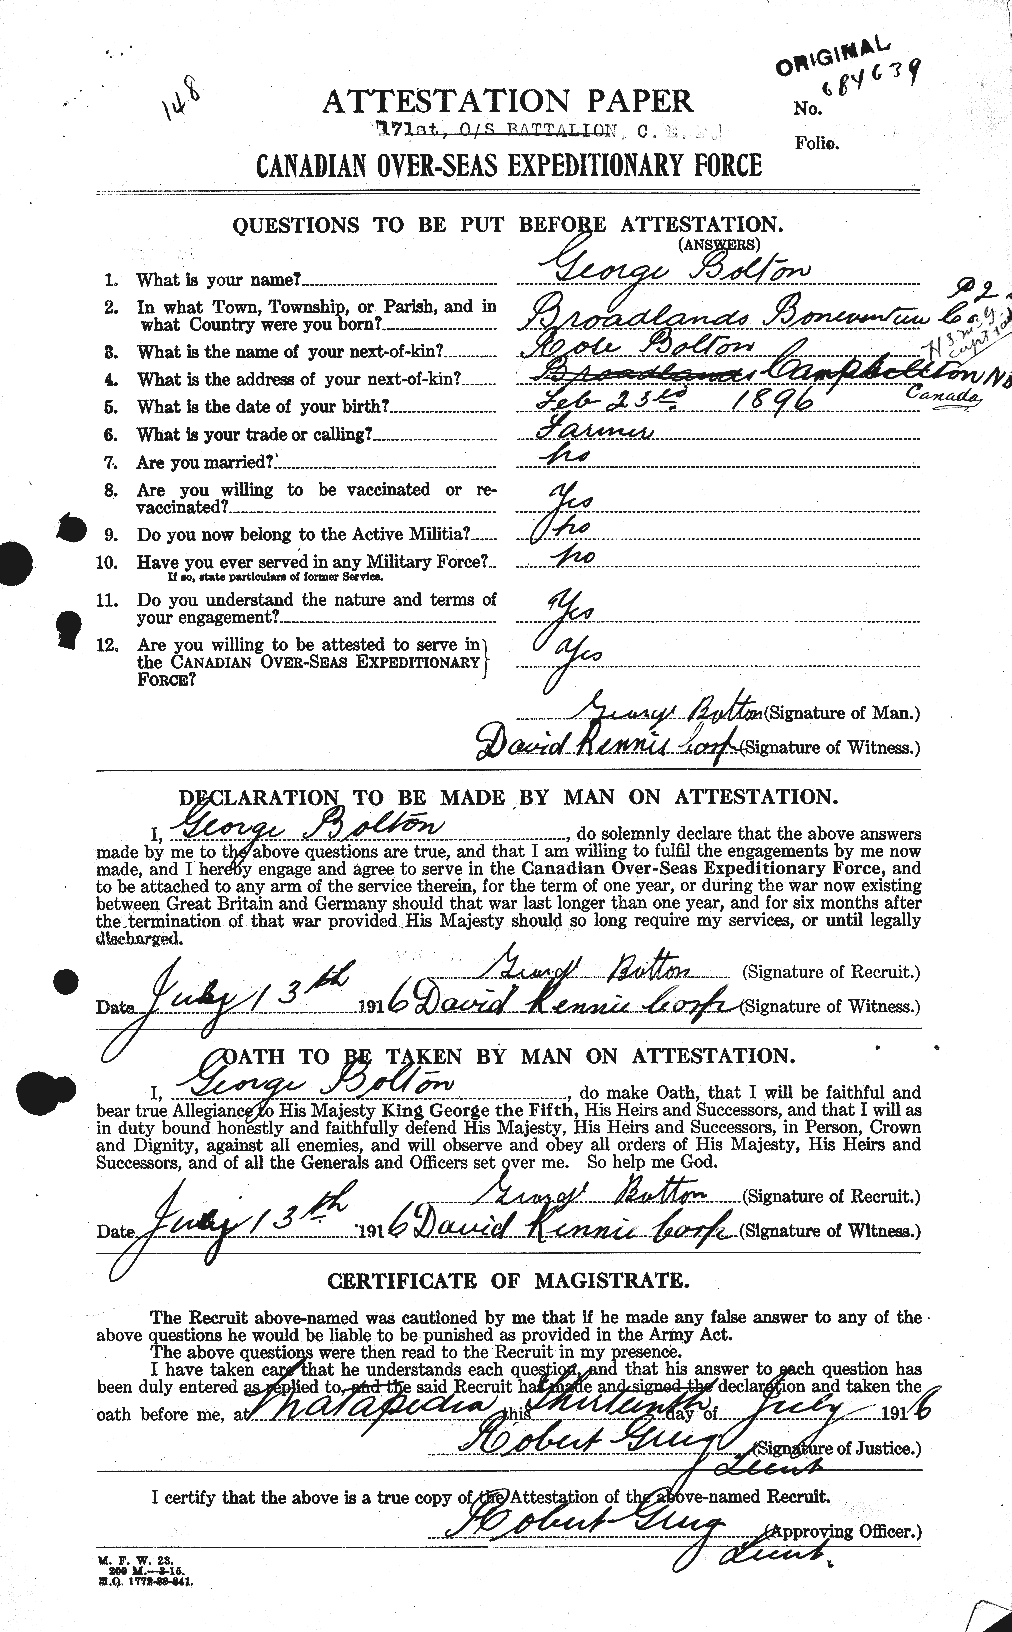 Personnel Records of the First World War - CEF 250027a